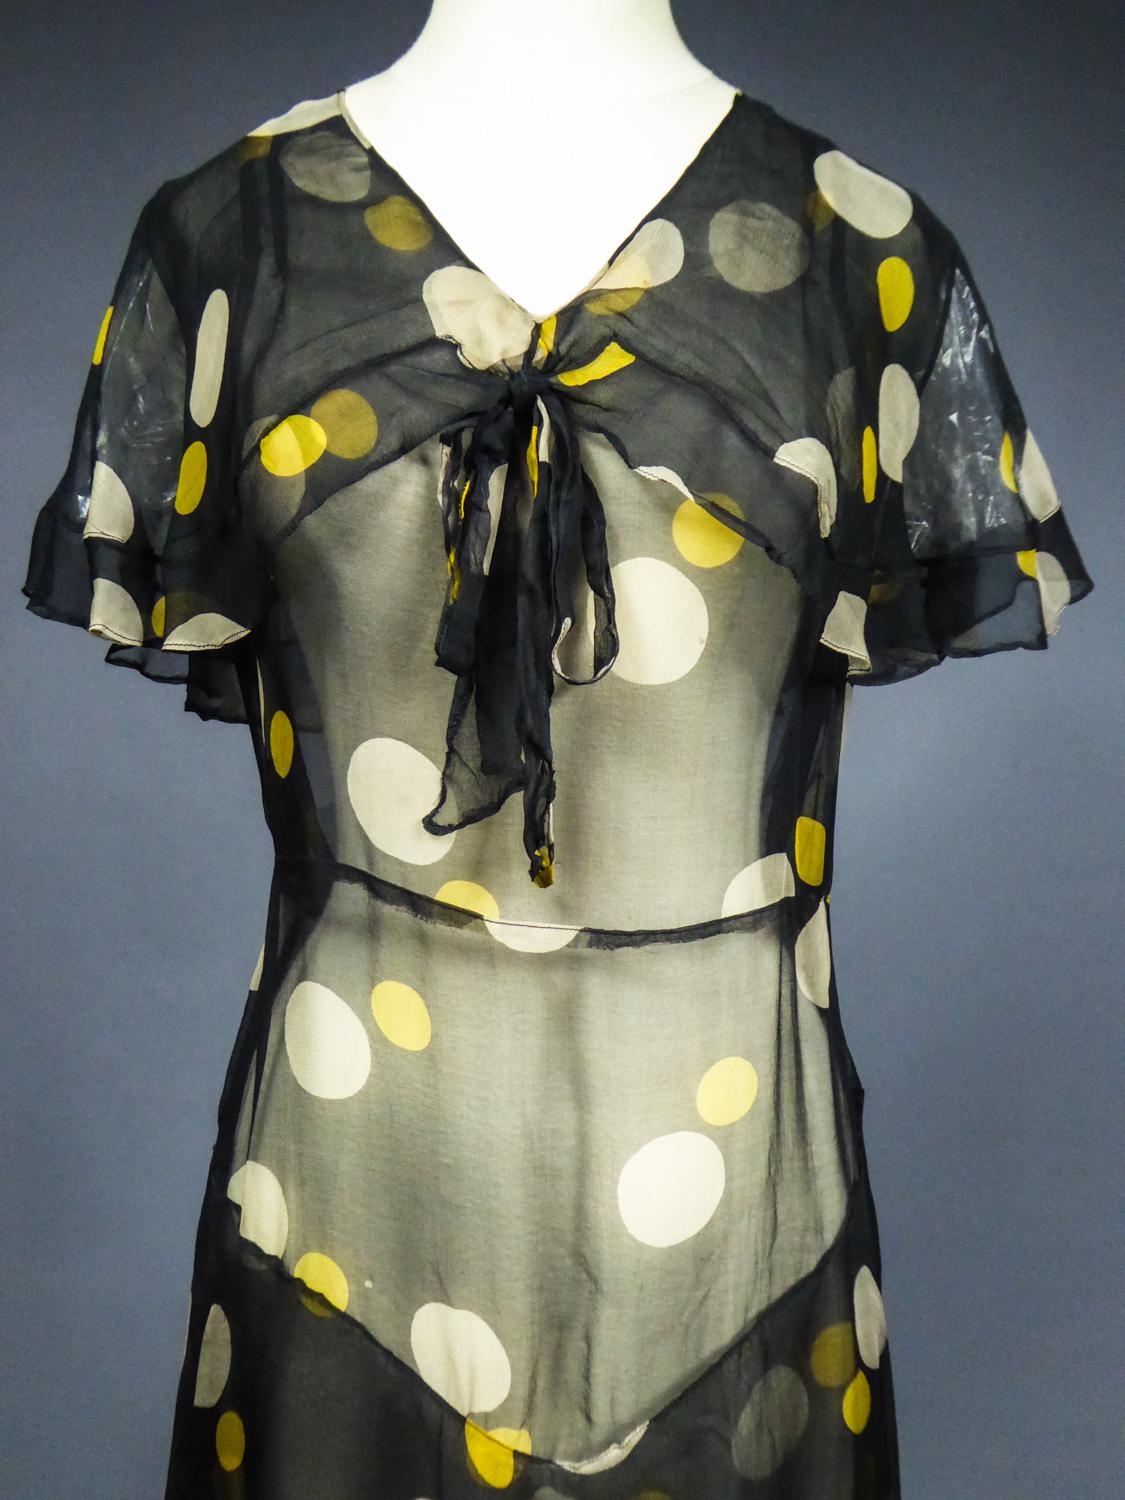 Circa 1930/1935
France

Summer dress in black muslin printed chiffon with large yellow and white polka dots from the 1930s. Straight and fluid dress with integrated shawl covering the shoulders and closing with a matching bow. Skirt with two large